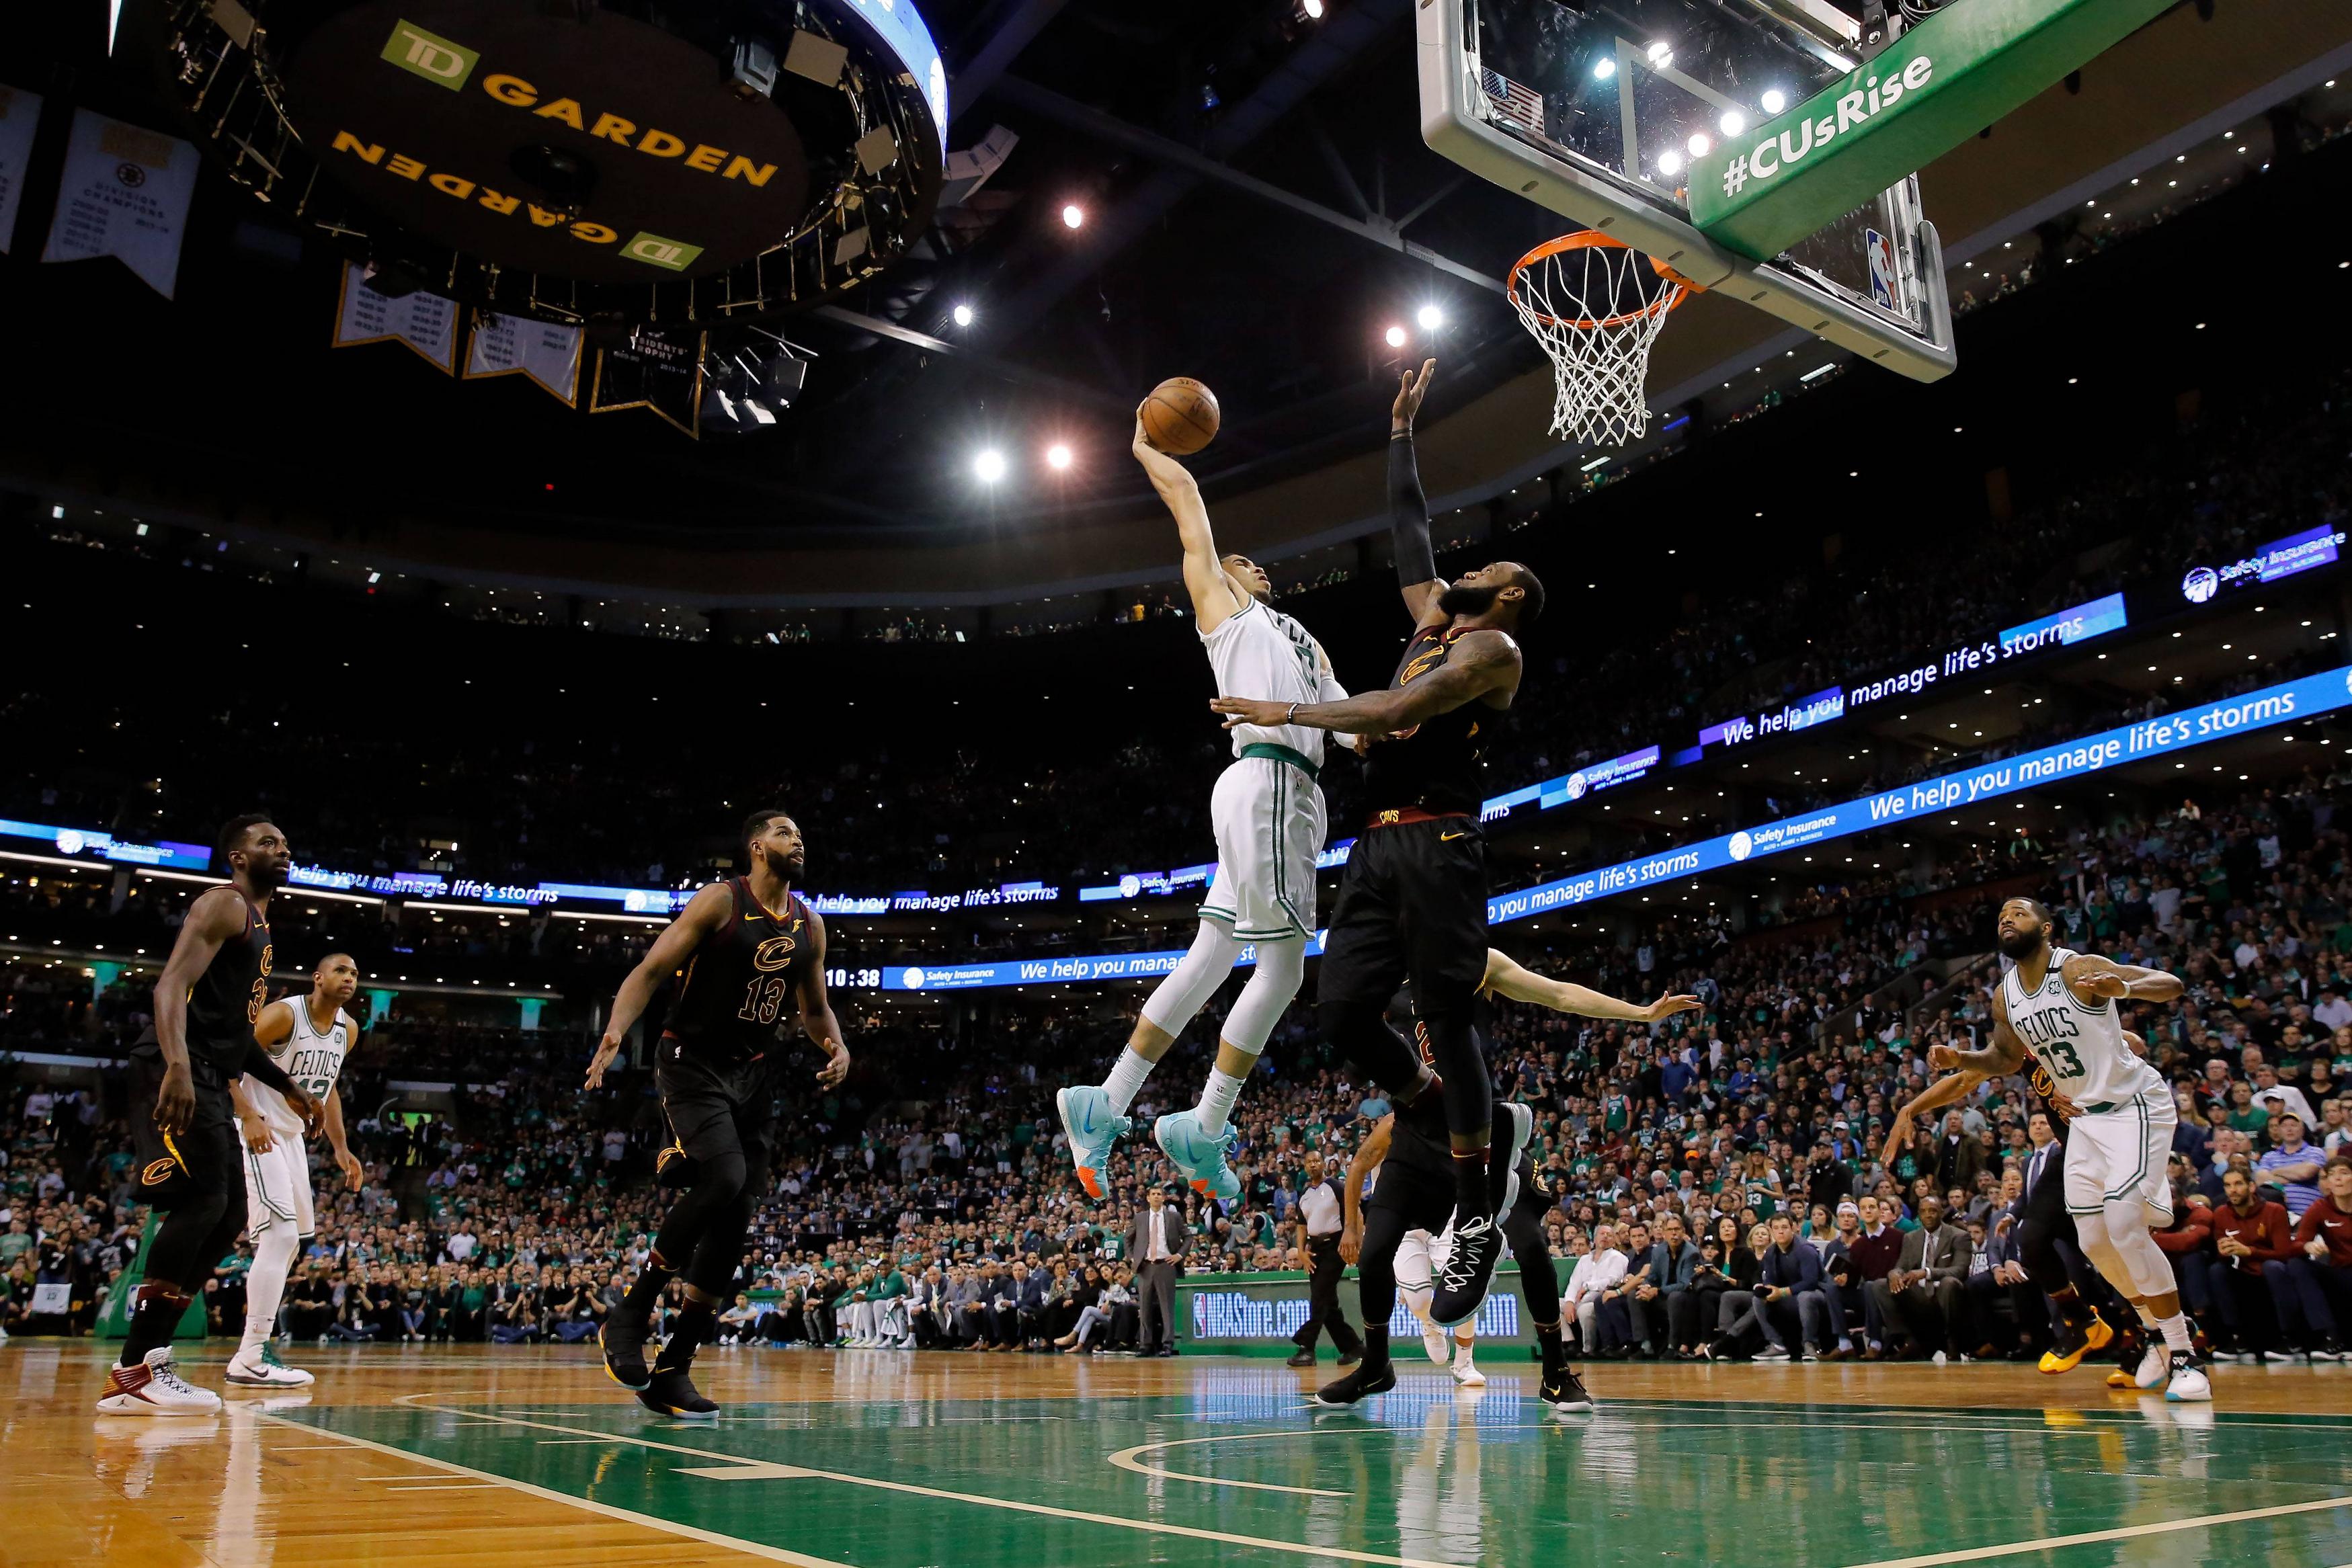 Does anyone have phone wallpaper of Jayson Tatum dunking on Lebron in the 2017 ECF?